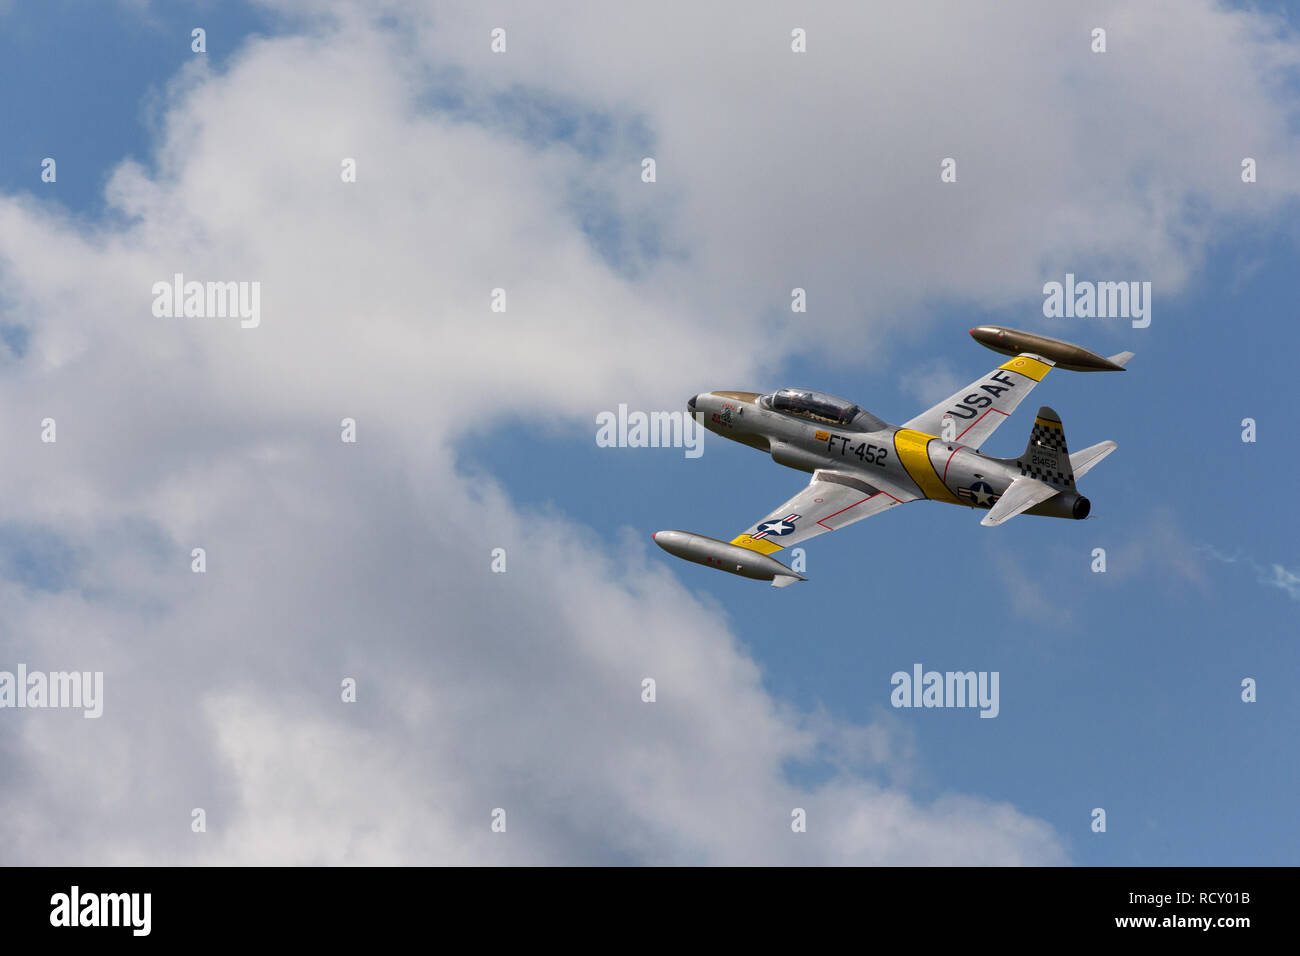 Lockheed T-33 Shooting Star an American subsonic jet trainer flying in air show Stock Photo